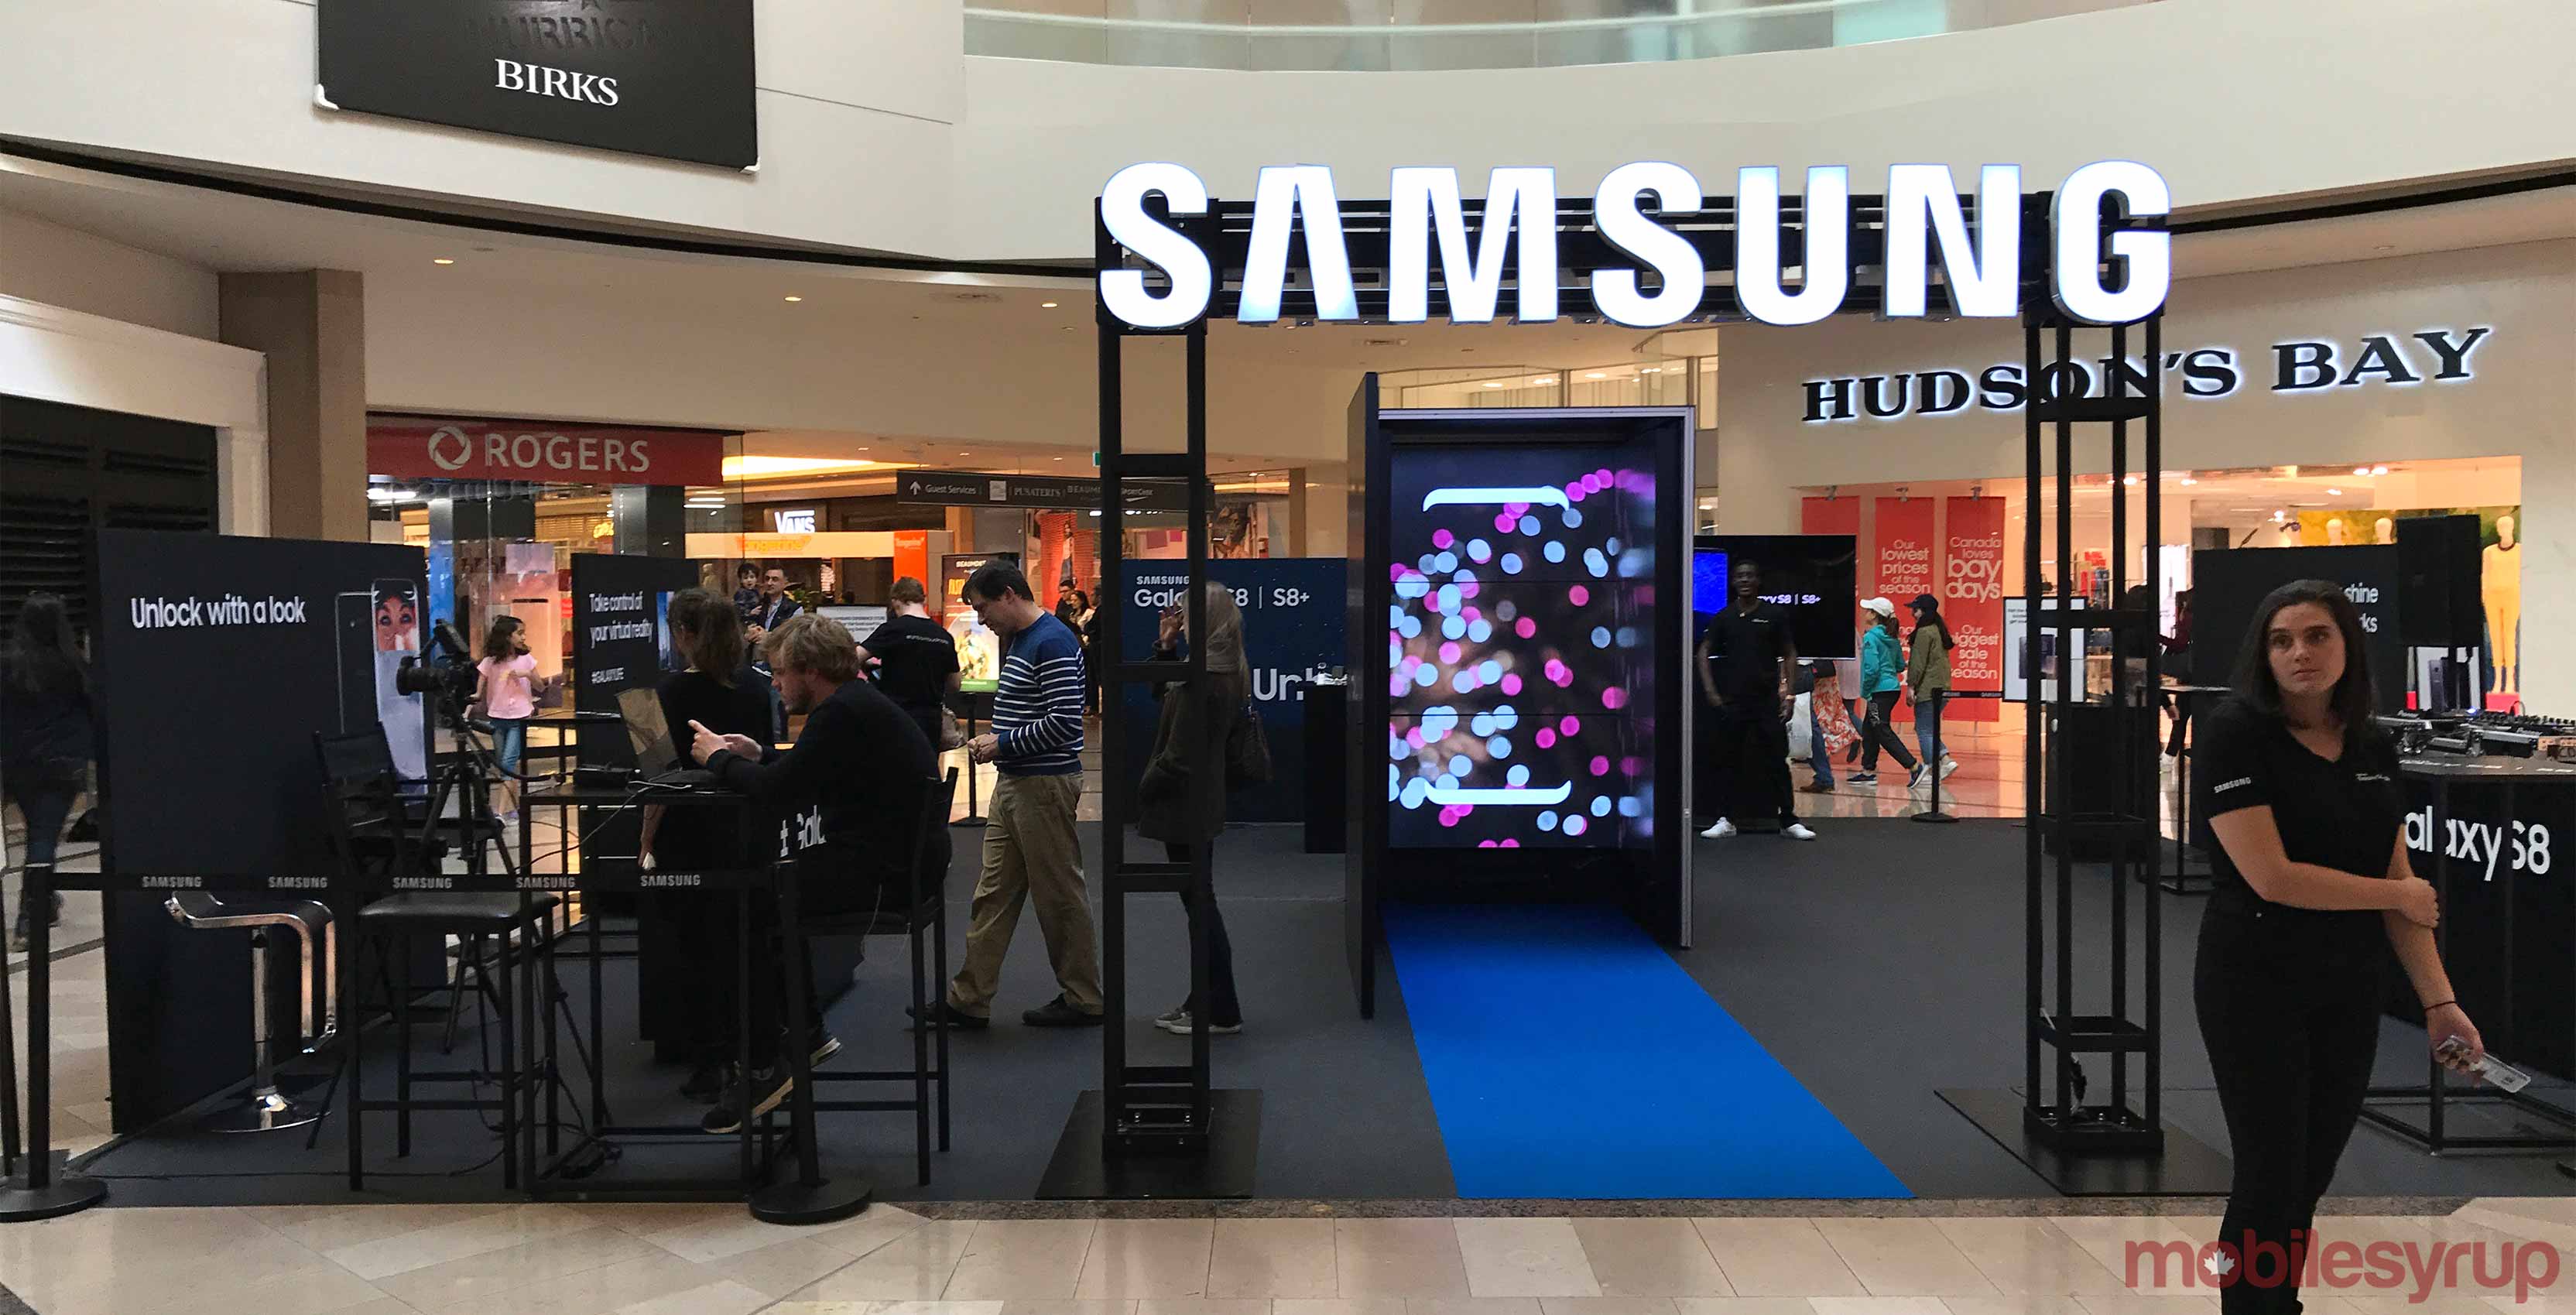 Samsung Experience Store Mall - samsung silicon